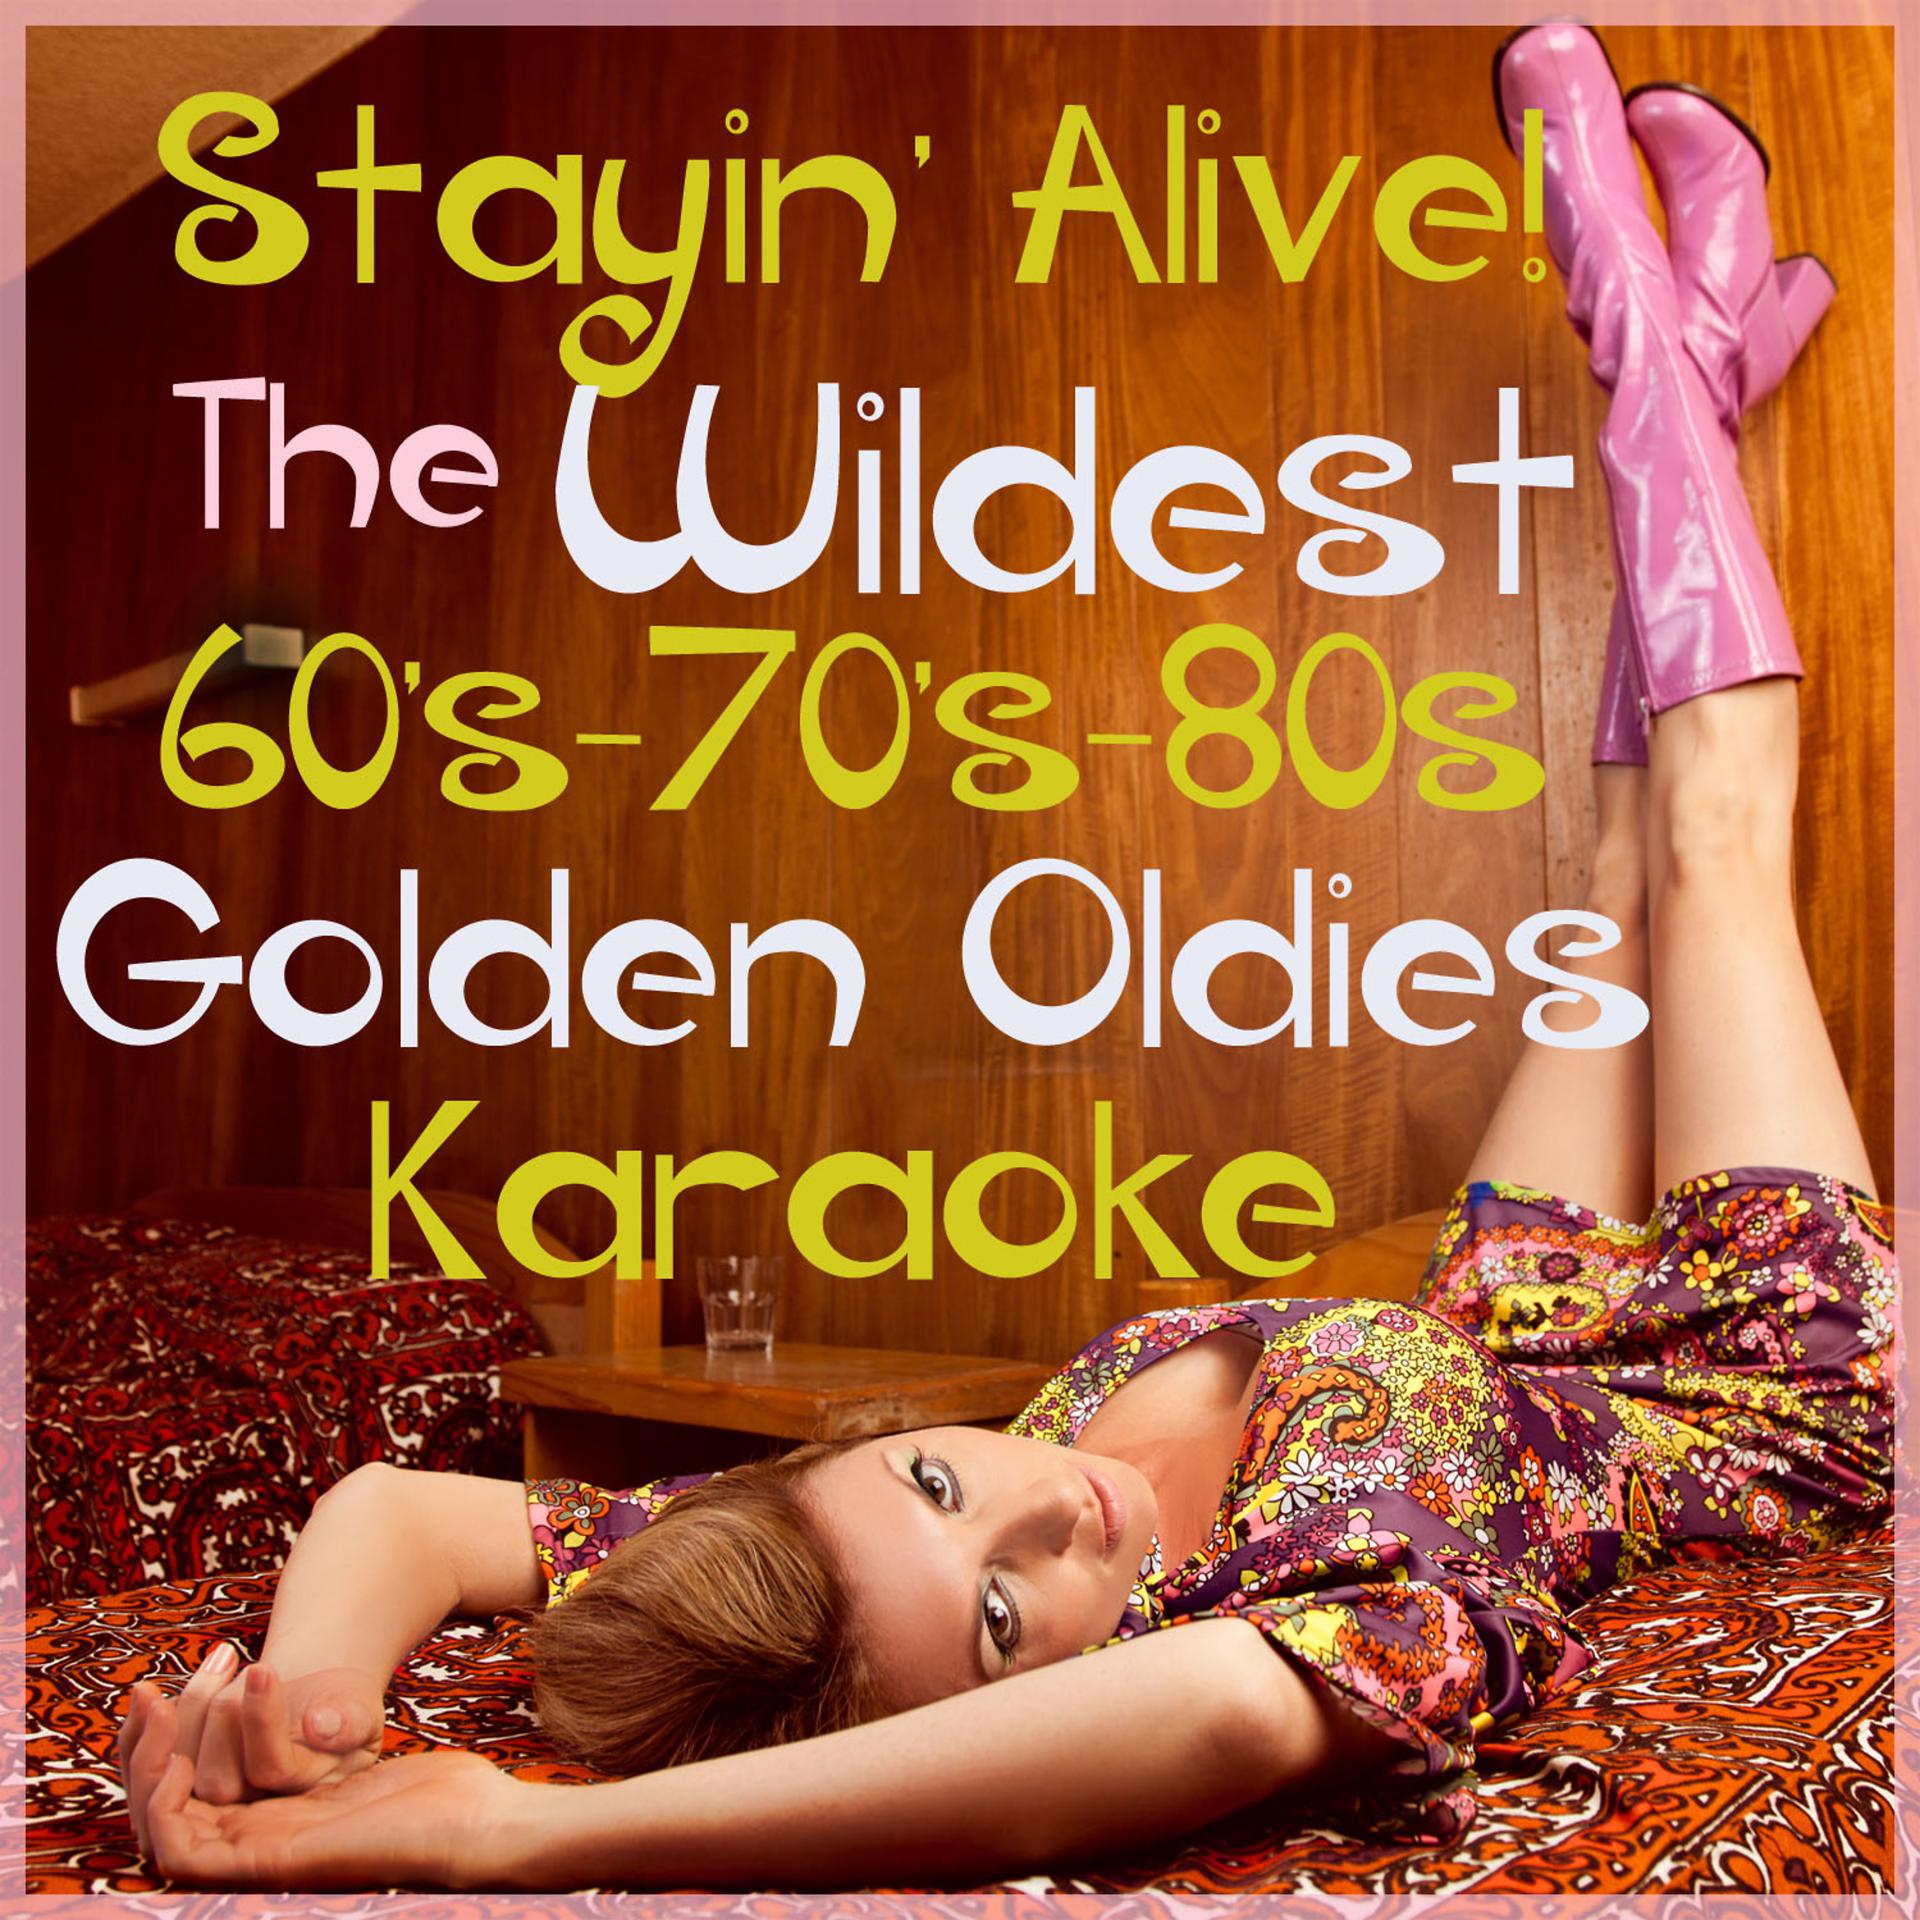 Постер альбома Stayin' Alive: The Wildest 60's - 70's - 80's Golden Oldies Karaoke with Stayin' Alive, Ymca, I Will Survive, Total Eclipse of the Heart, And More!